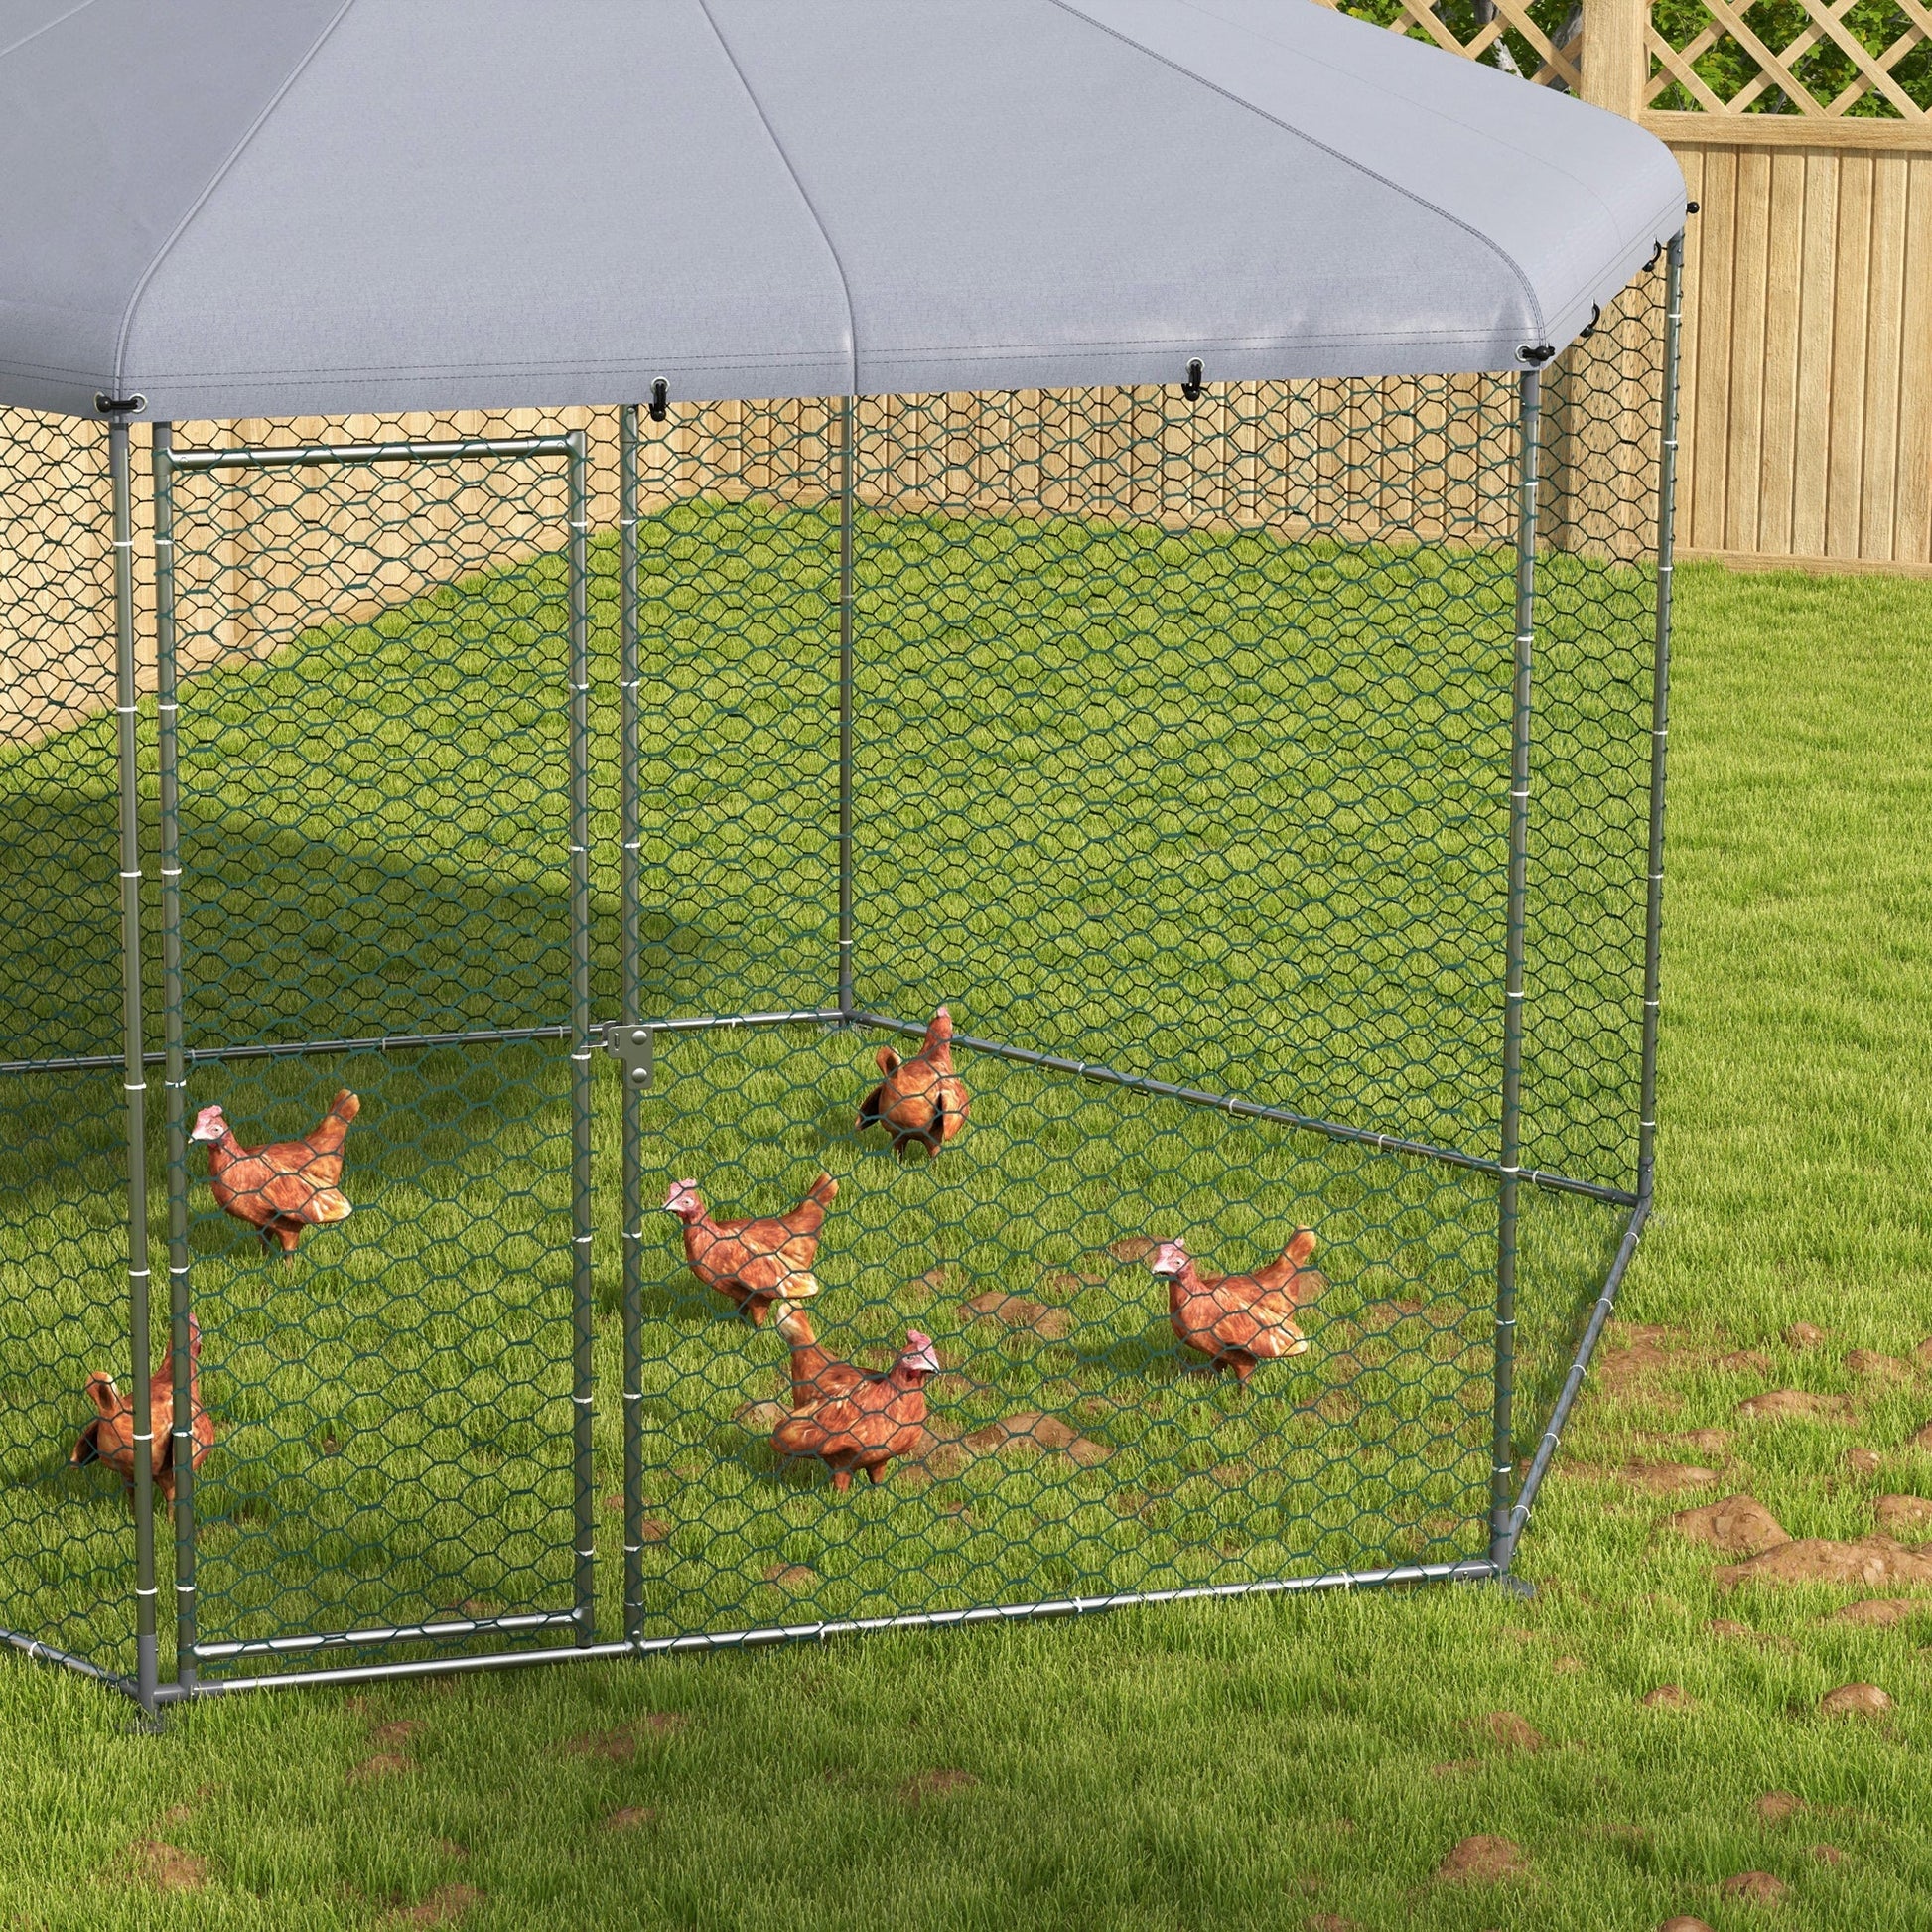 Chicken Coop with Cover for Outdoor Backyard, Chicken Run for 10-15 Chickens, Rabbits, Ducks, 13.1' x 11.4' at Gallery Canada